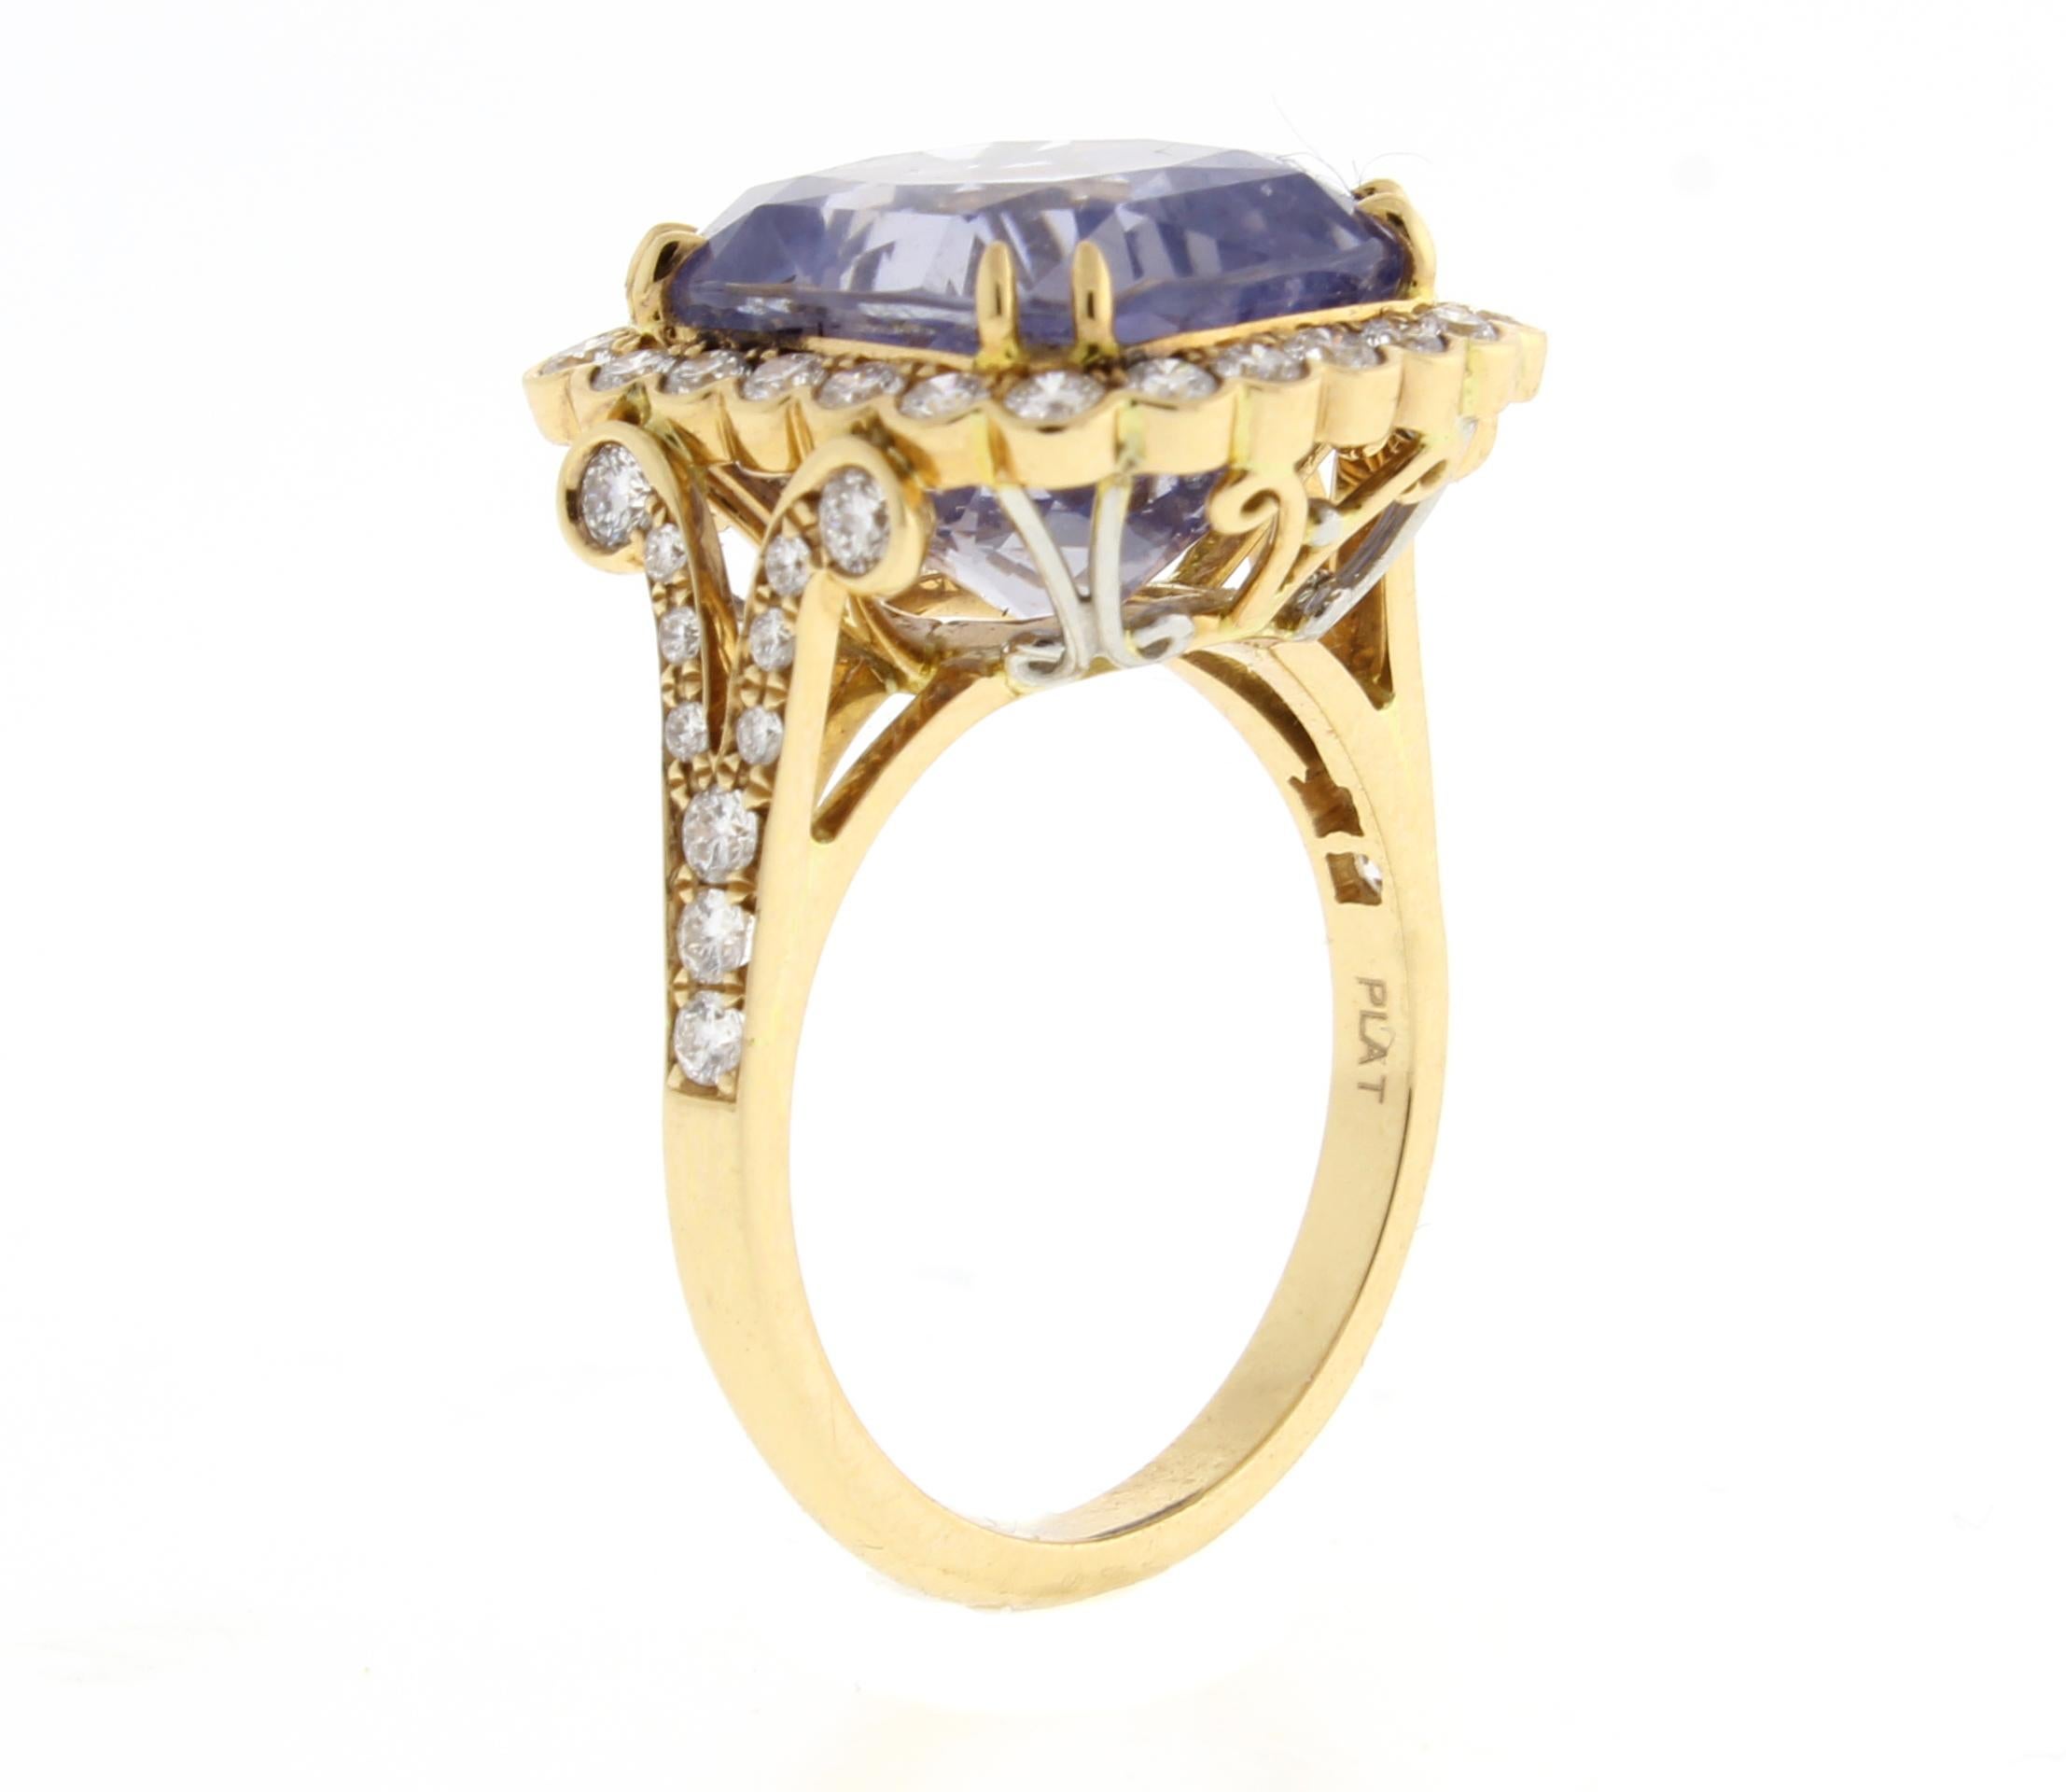 This ring features a non-heated Ceylon lavender sapphire that weighs 11.92 carats. The sapphire is surrounded by 46 bead-set round brilliant diamonds that have a total weight of .81 carats. The ring is 18 karat peach gold and is handmade by